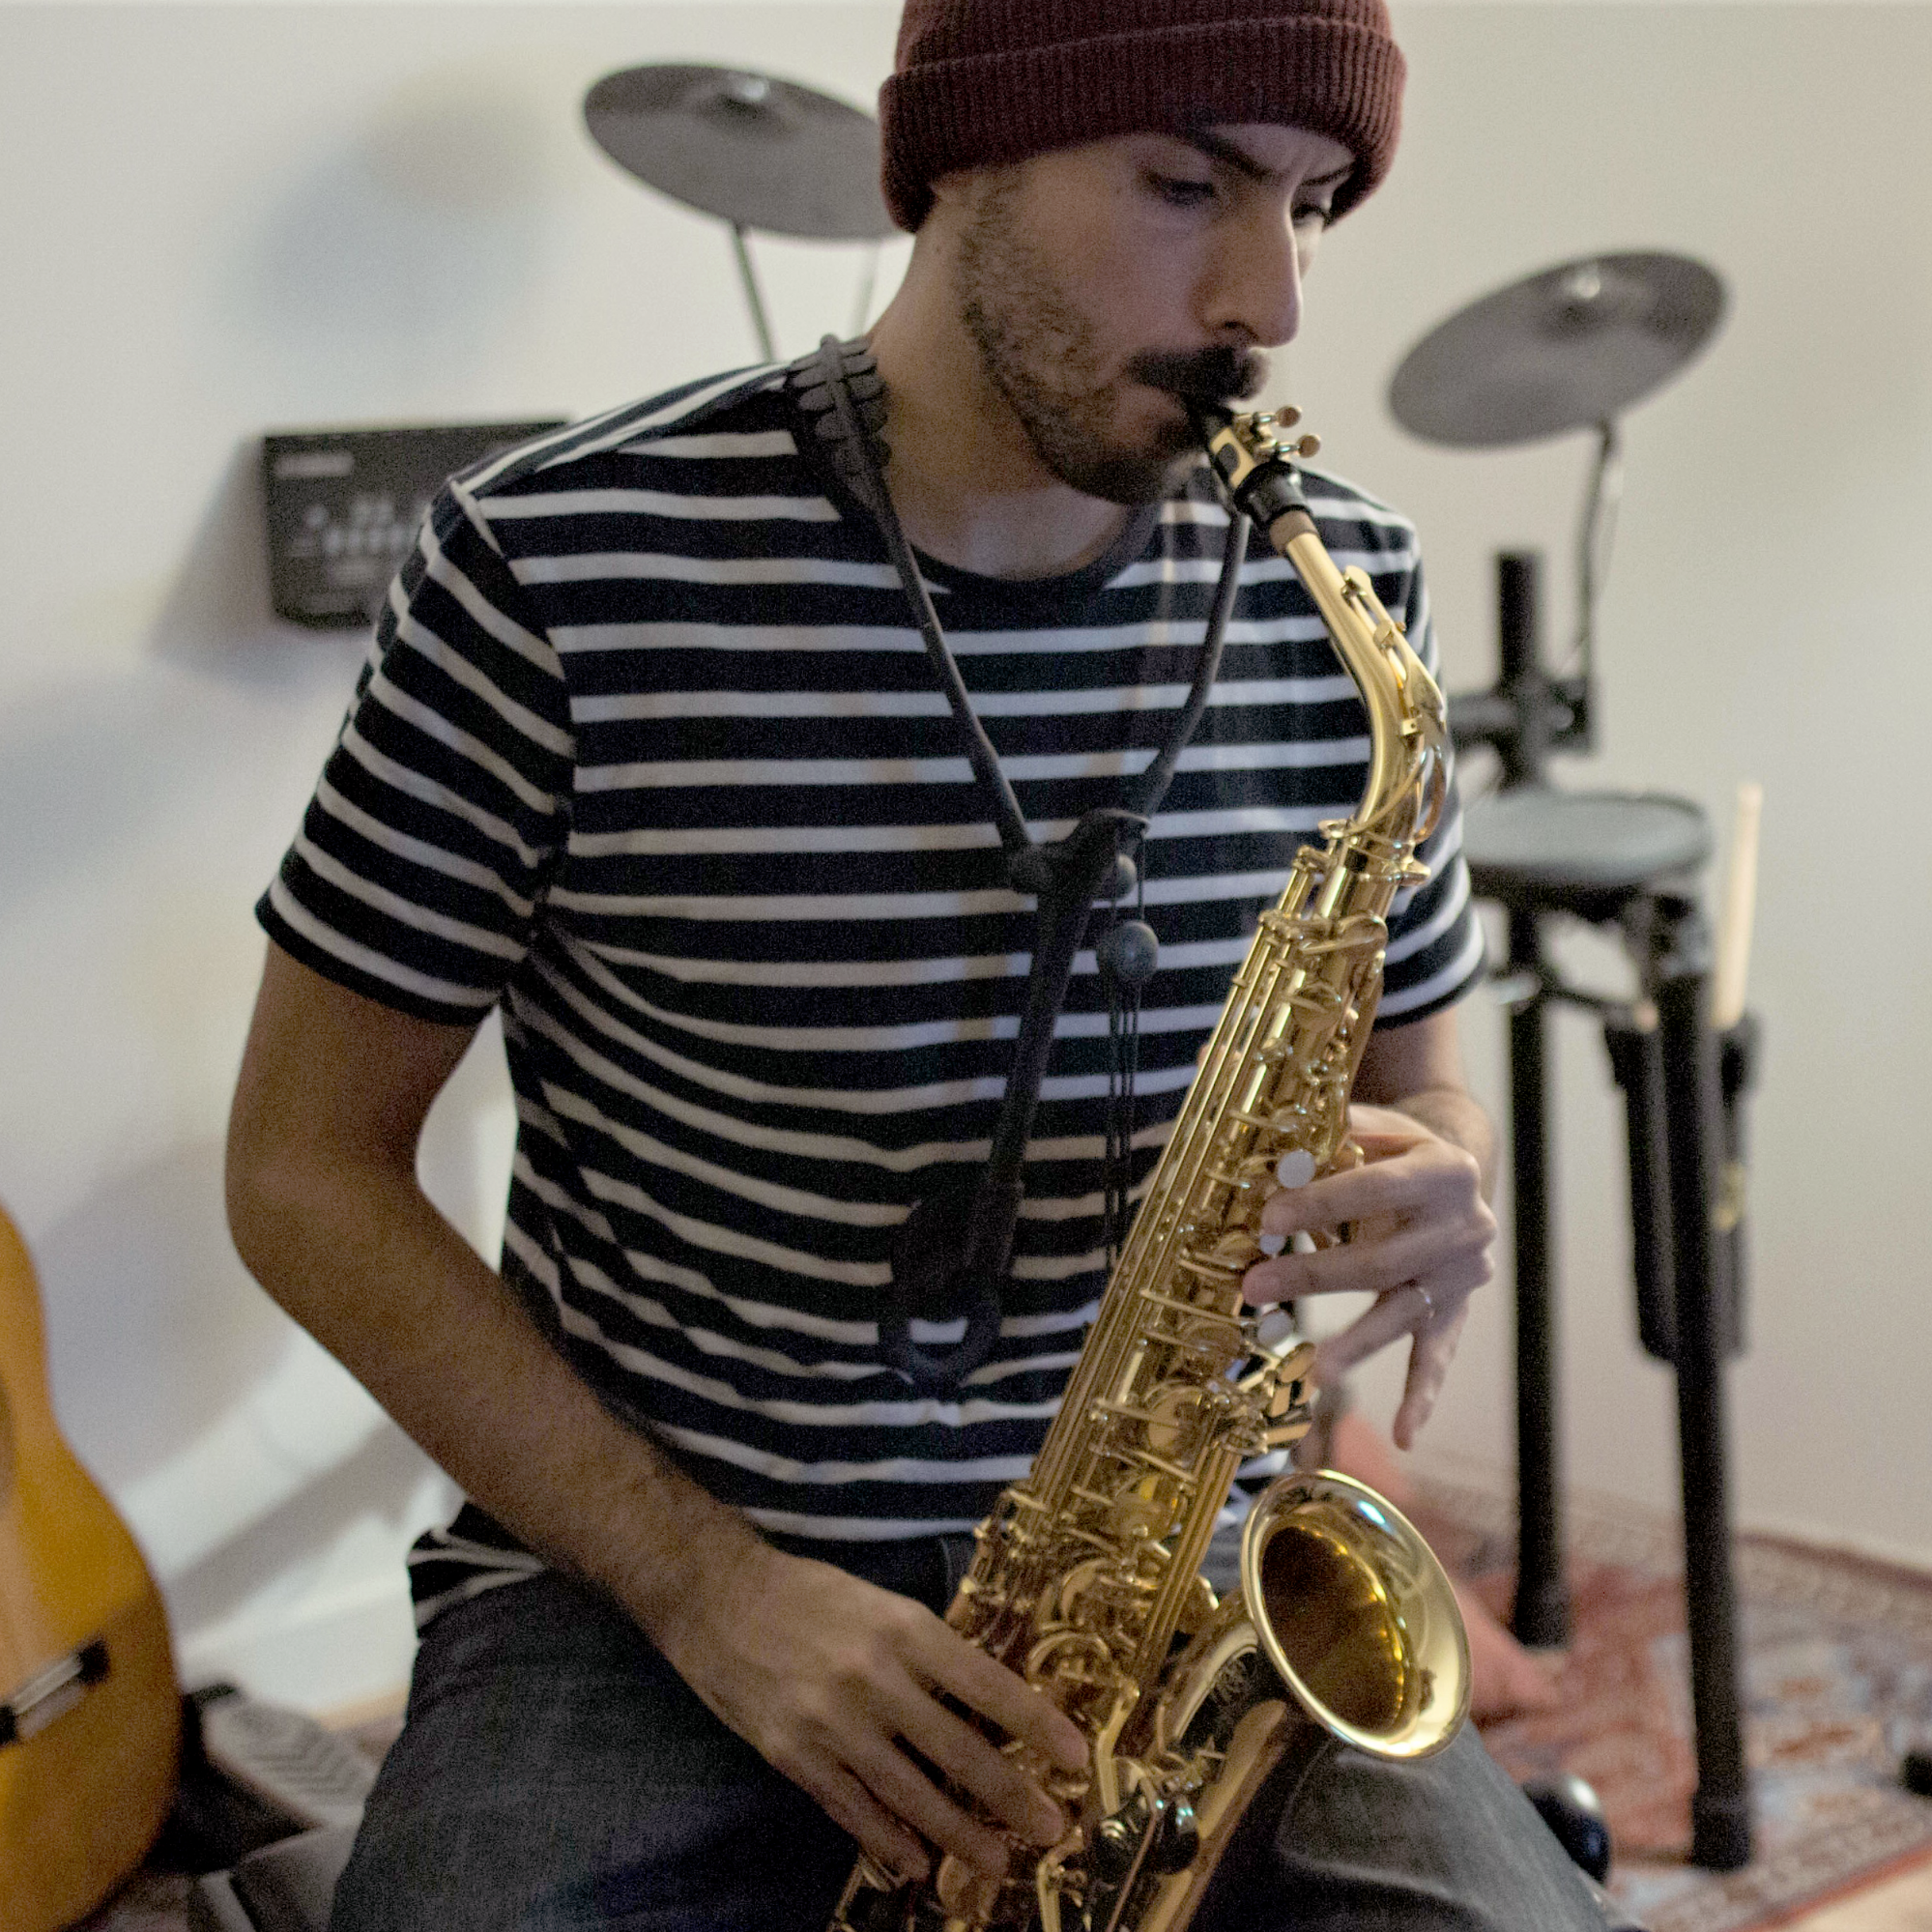 Photo of Anis playing the saxophone